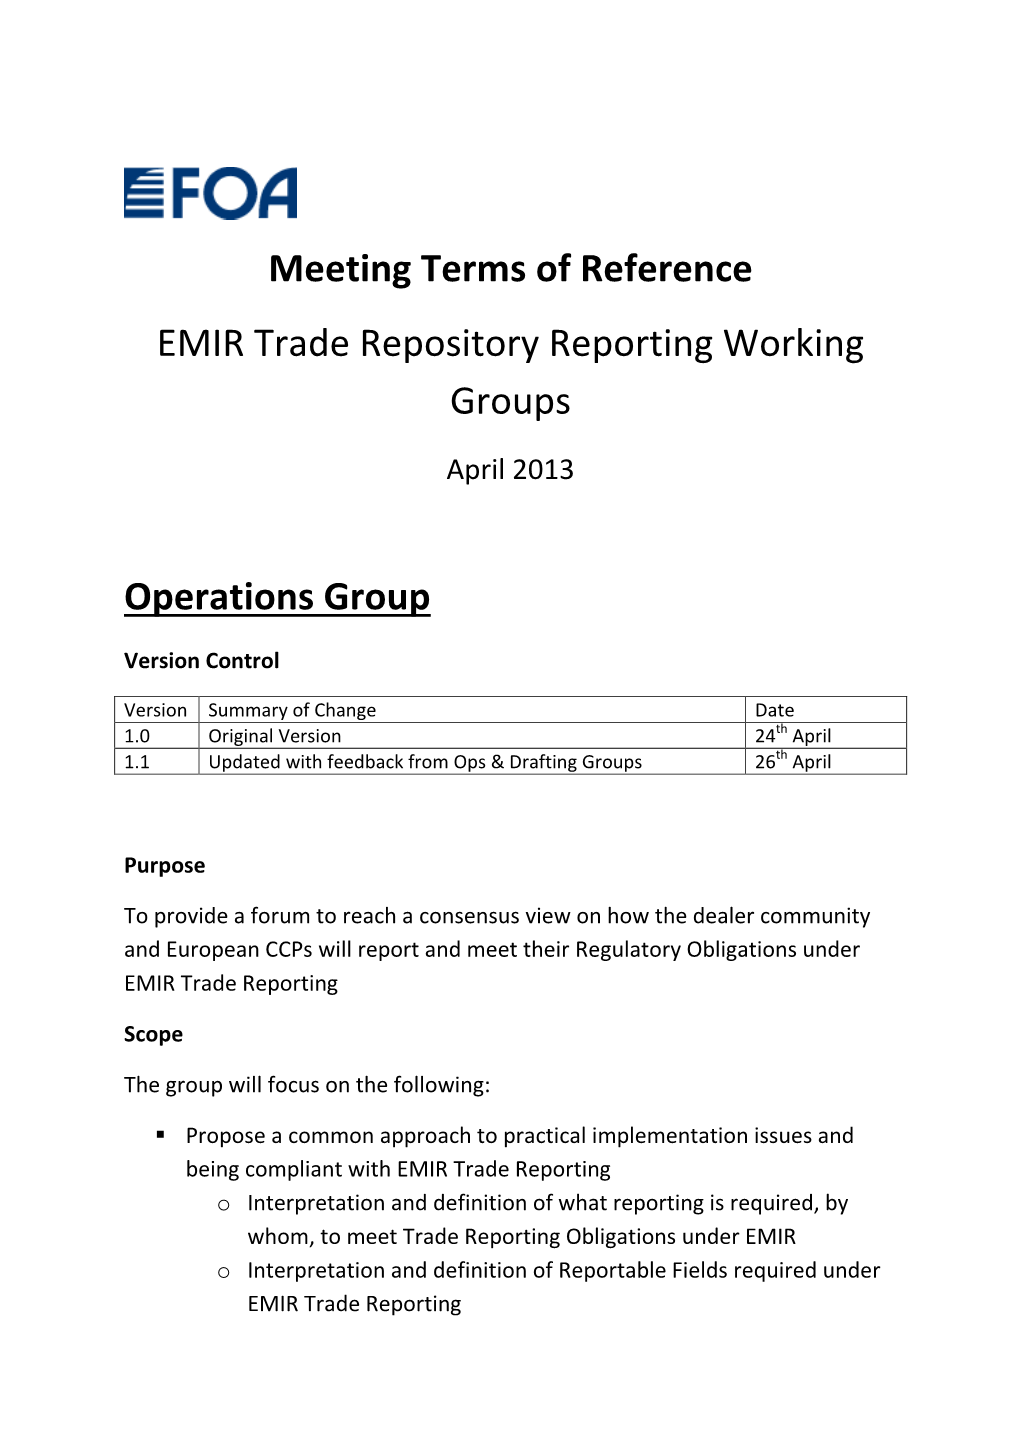 Meeting Terms of Reference EMIR Trade Repository Reporting Working Groups